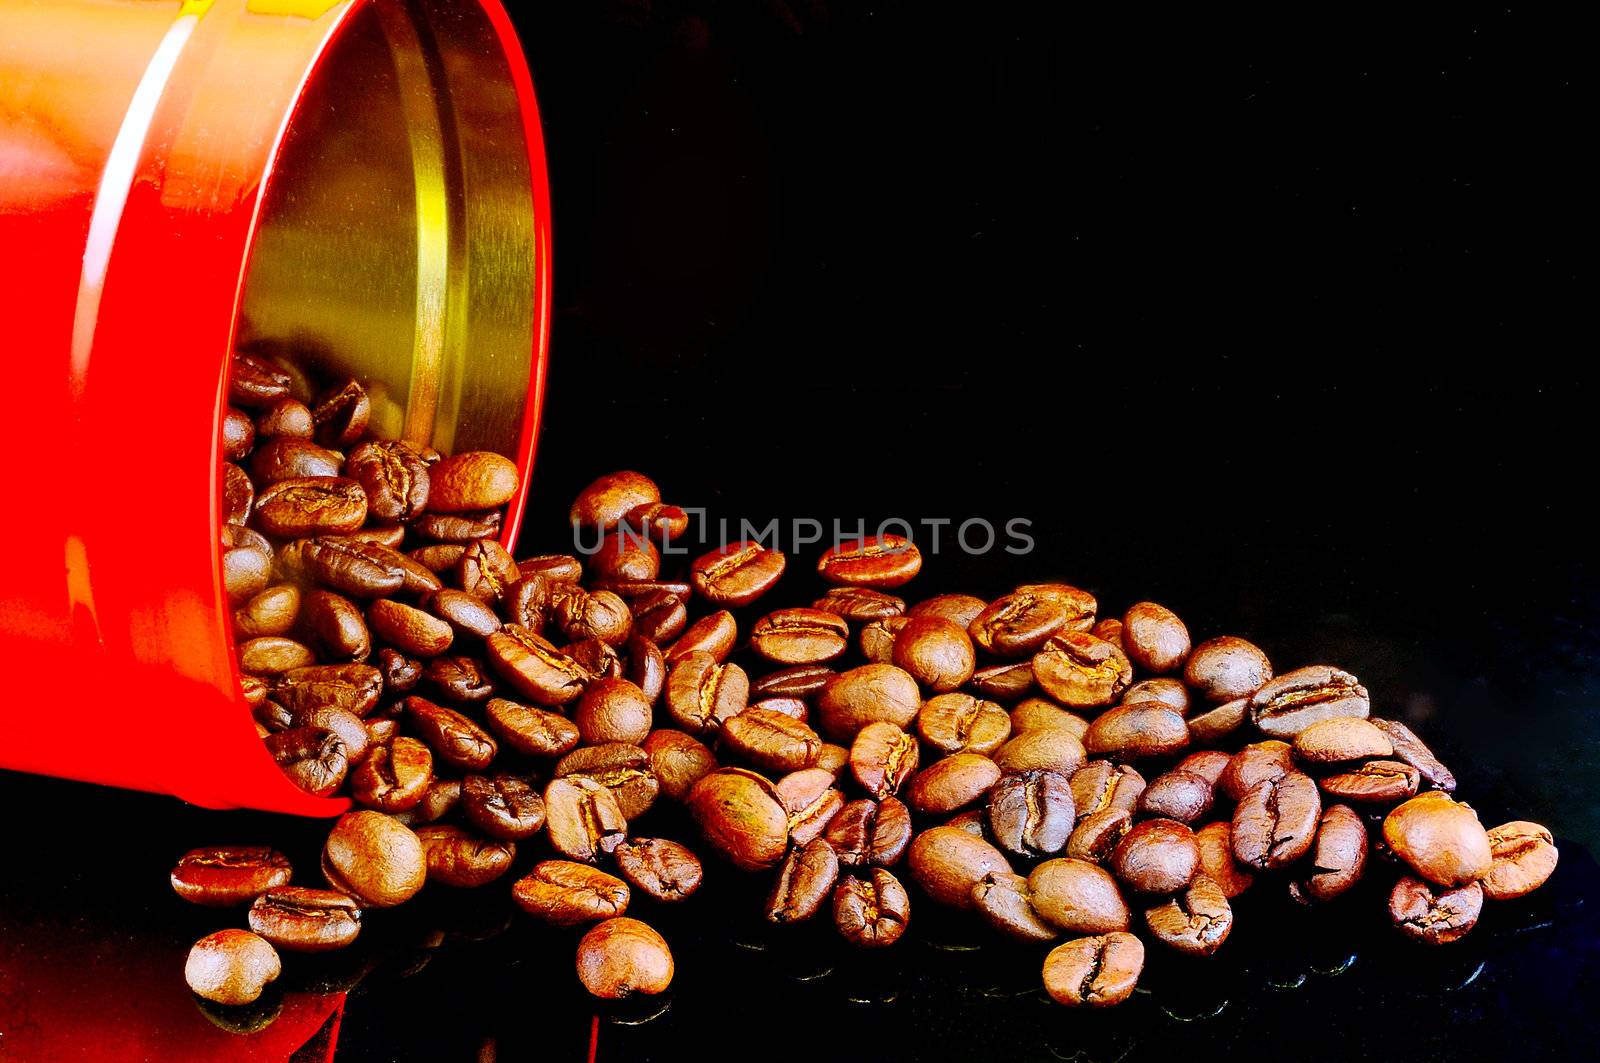 Hot coffee grain poured out of the red picture with the reflection of the banks against a black background